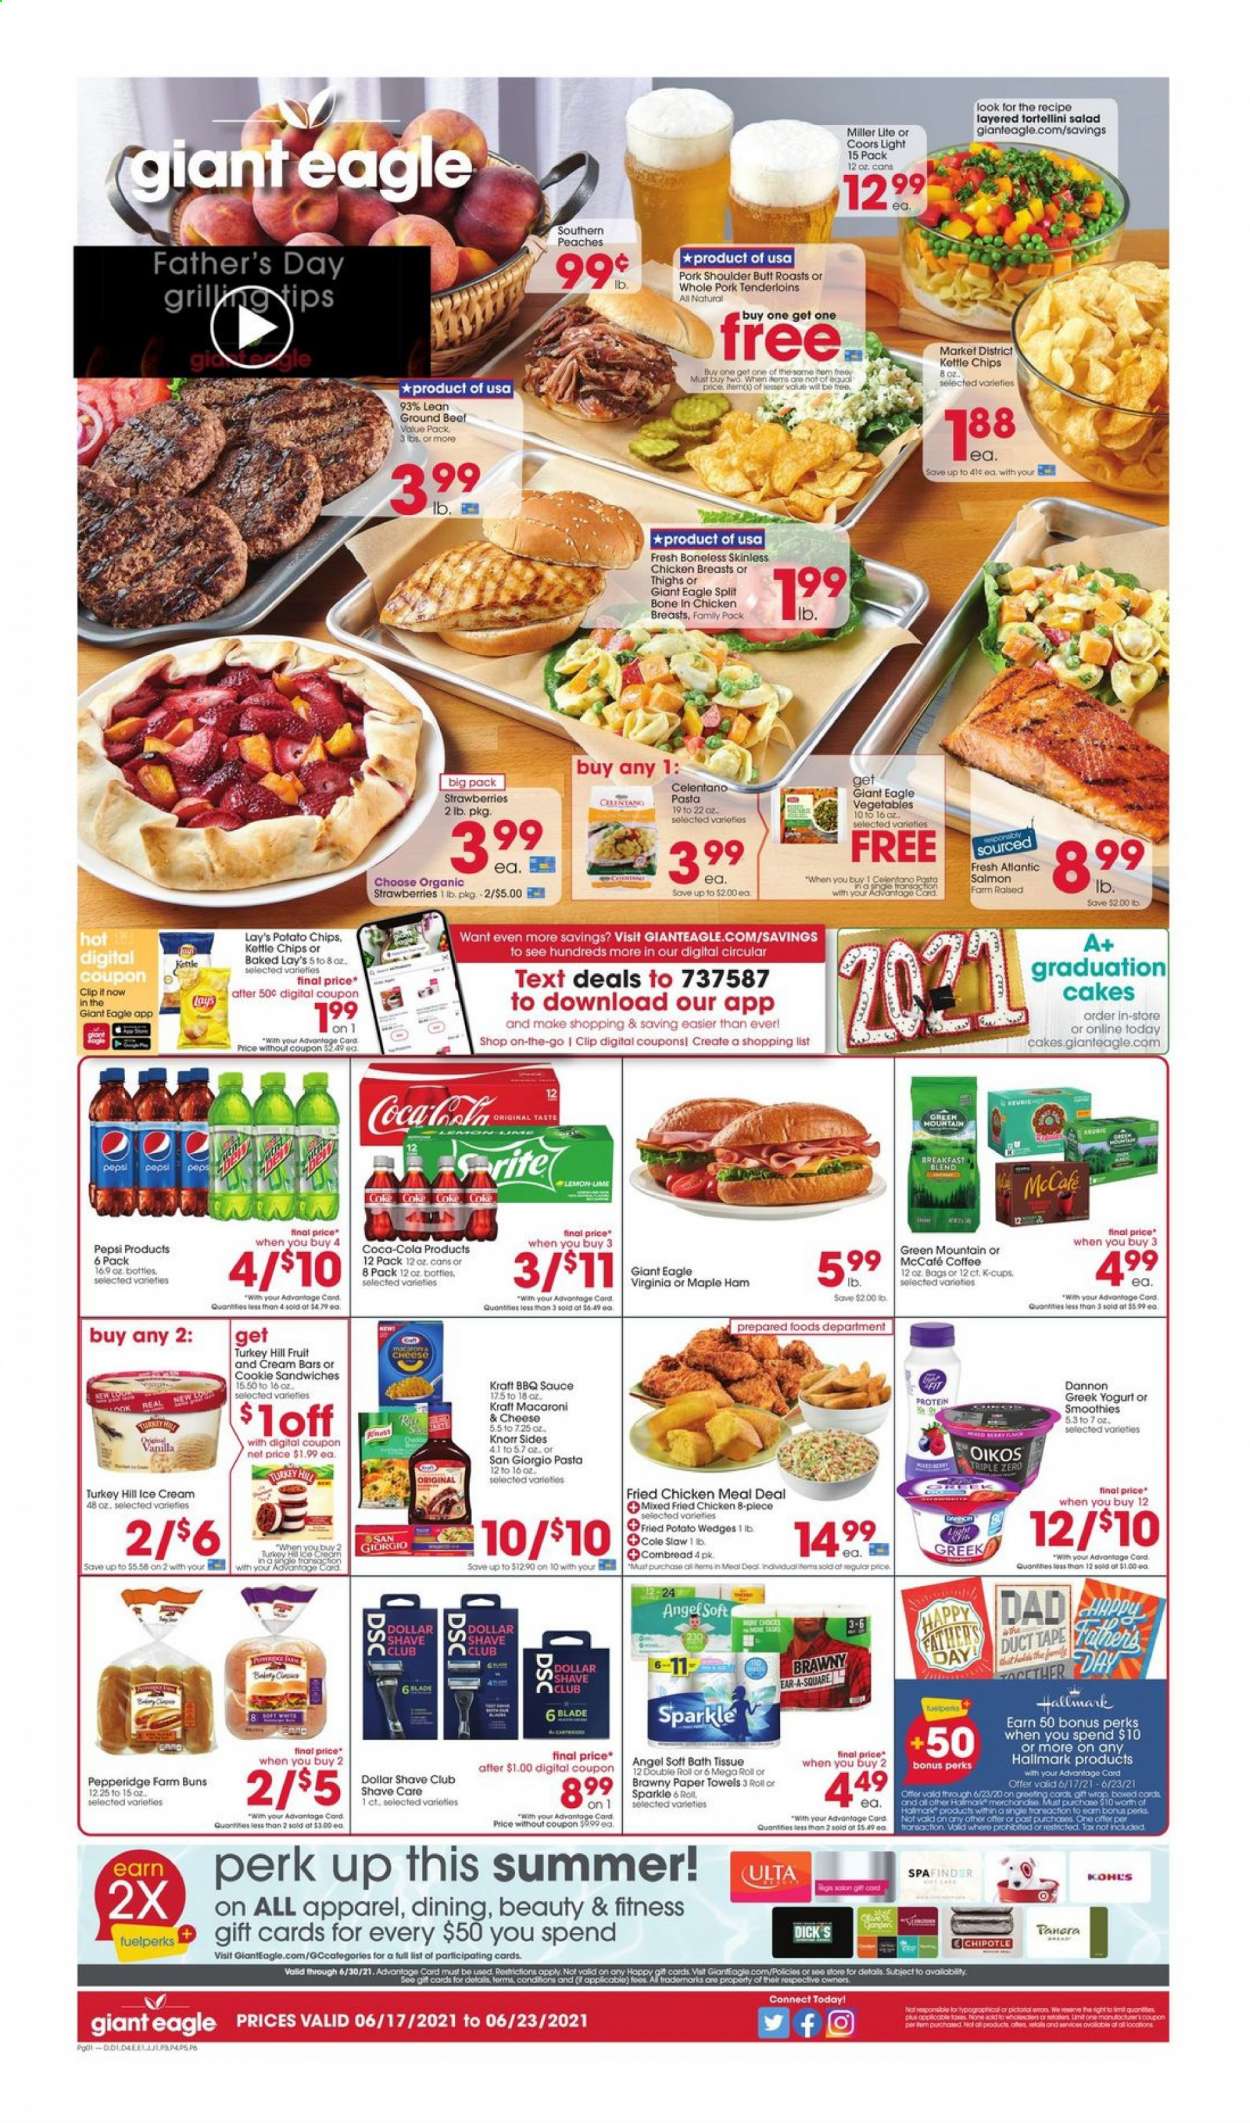 thumbnail - Giant Eagle Flyer - 06/17/2021 - 06/23/2021 - Sales products - Miller Lite, Coors, cake, buns, strawberries, salmon, macaroni & cheese, sandwich, pasta, Knorr, sauce, tortellini, fried chicken, Kraft®, ham, greek yoghurt, yoghurt, Oikos, Dannon, ice cream, potato wedges, potato chips, chips, Lay’s, BBQ sauce, Coca-Cola, Pepsi, coffee, coffee capsules, L'Or, McCafe, K-Cups, breakfast blend, Green Mountain, beer, chicken breasts, beef meat, ground beef, pork meat, pork shoulder, pork tenderloin, bath tissue, kitchen towels, paper towels, Dollar Shave Club, peaches. Page 1.